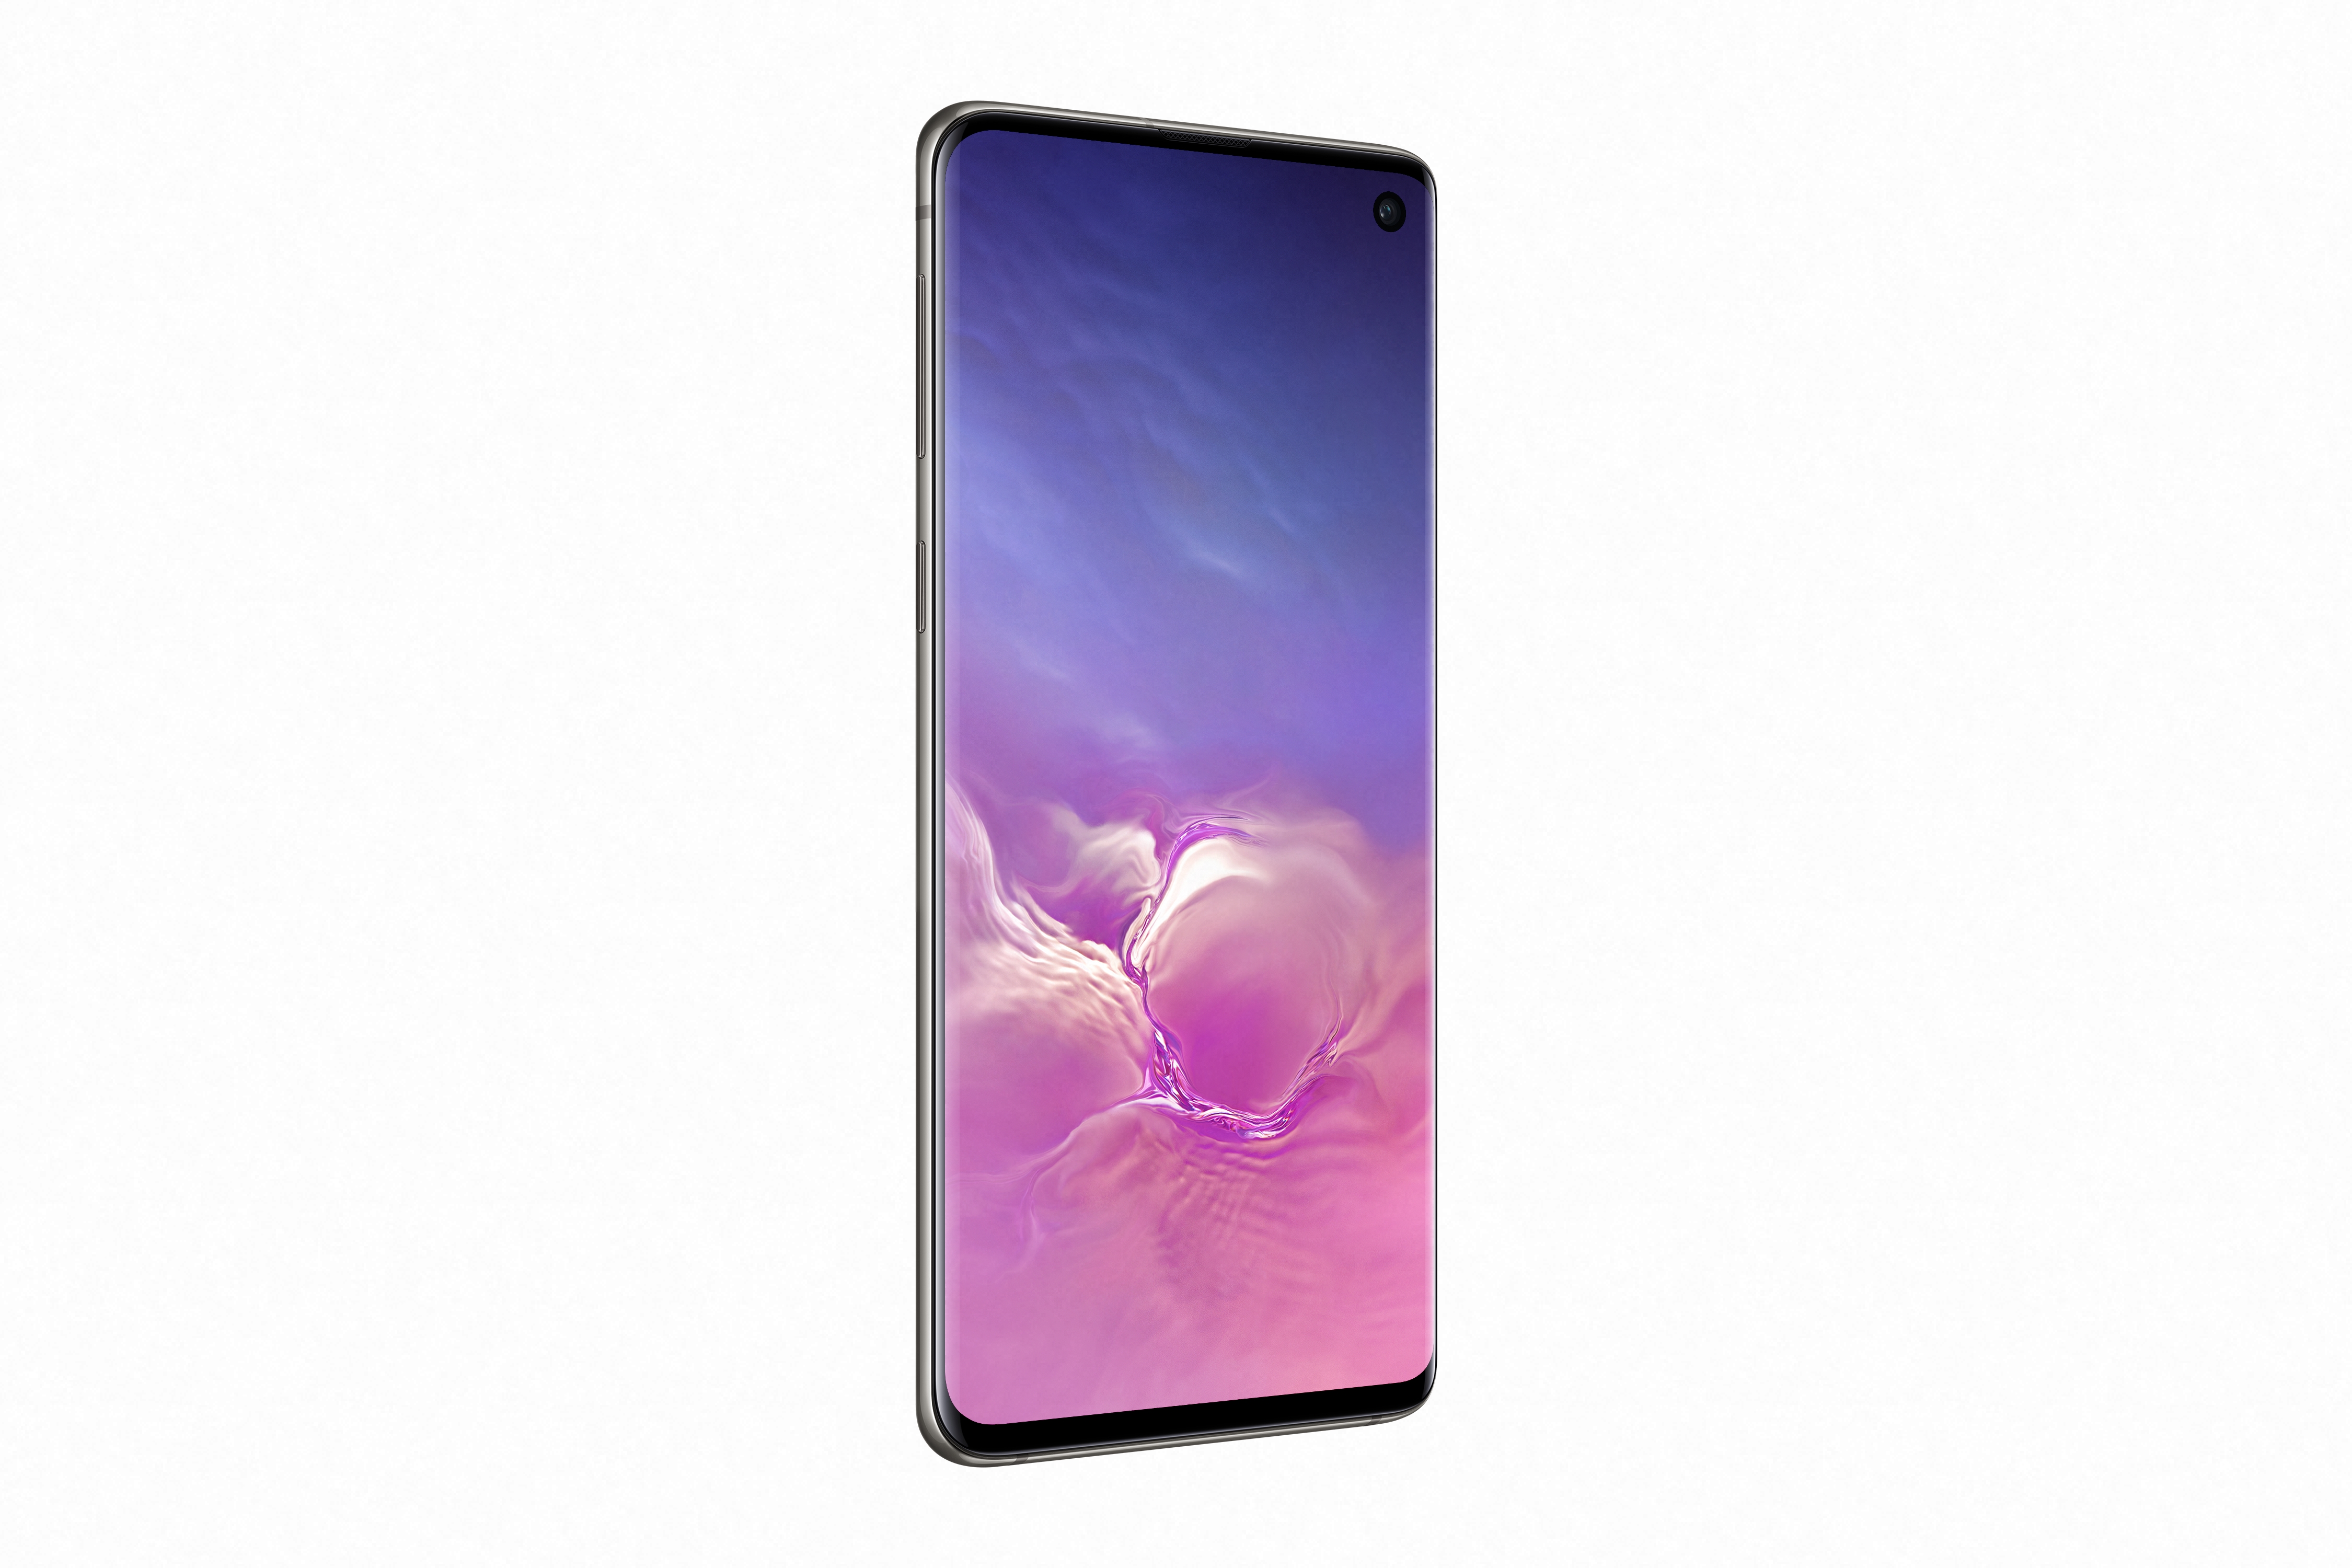 Samsung Galaxy S10 from an angled side view